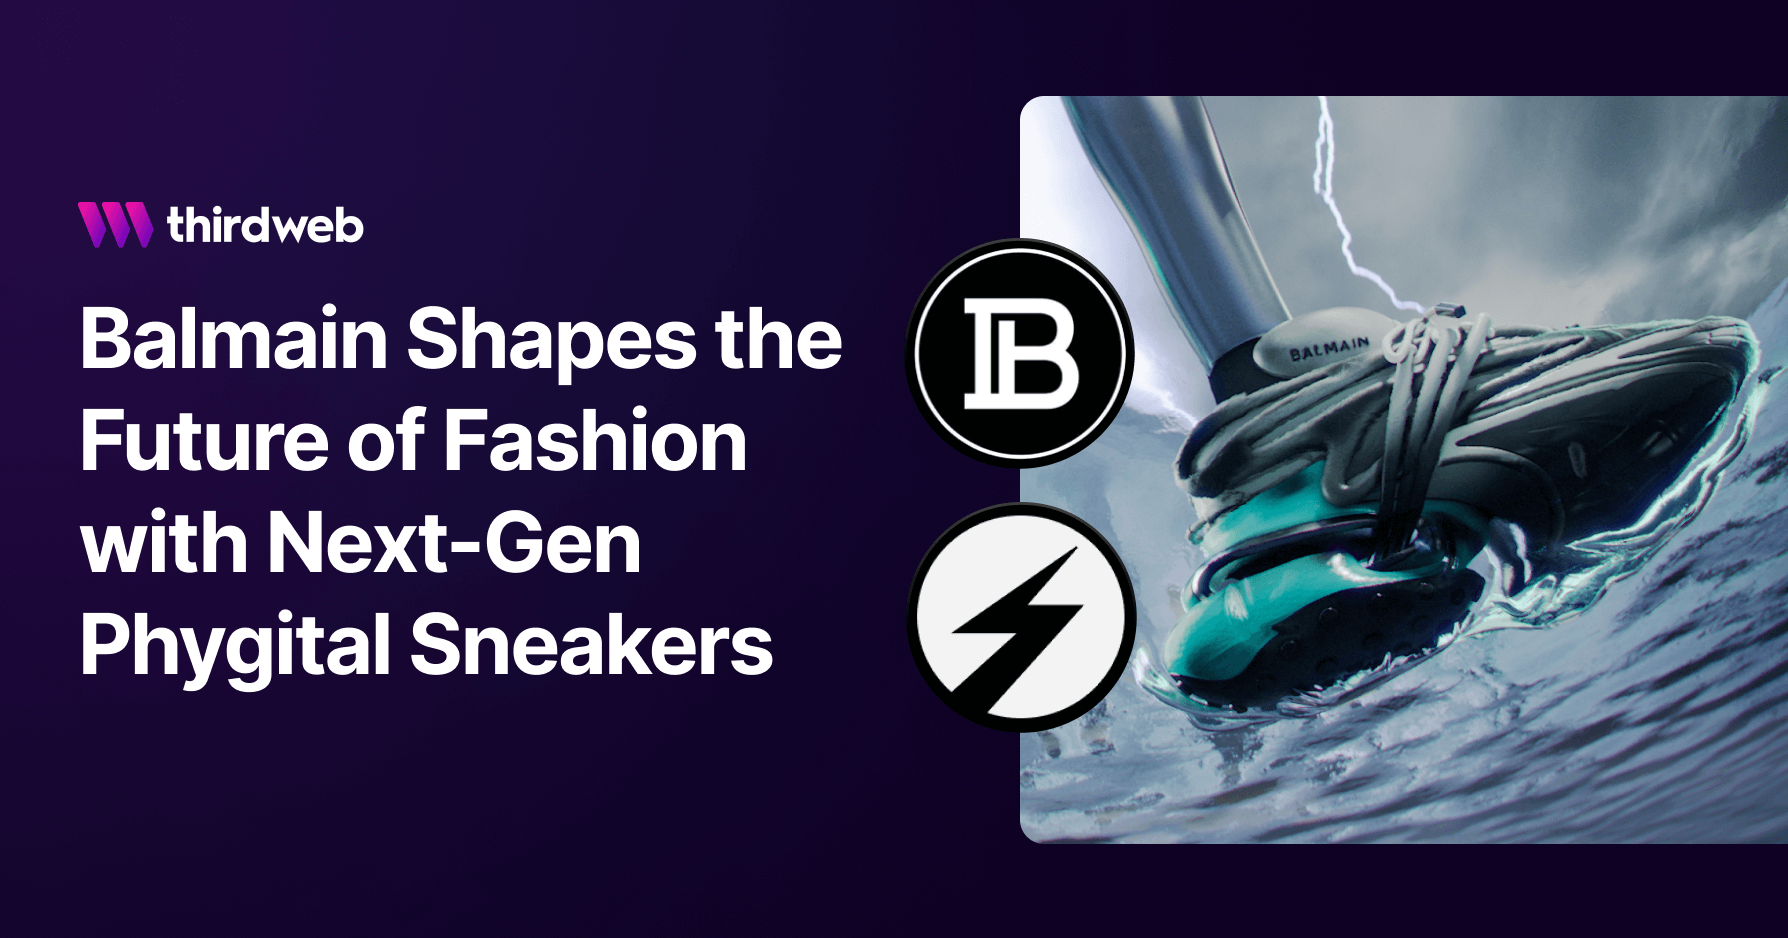 Balmain Shapes the Future of Fashion with Phygital Sneakers